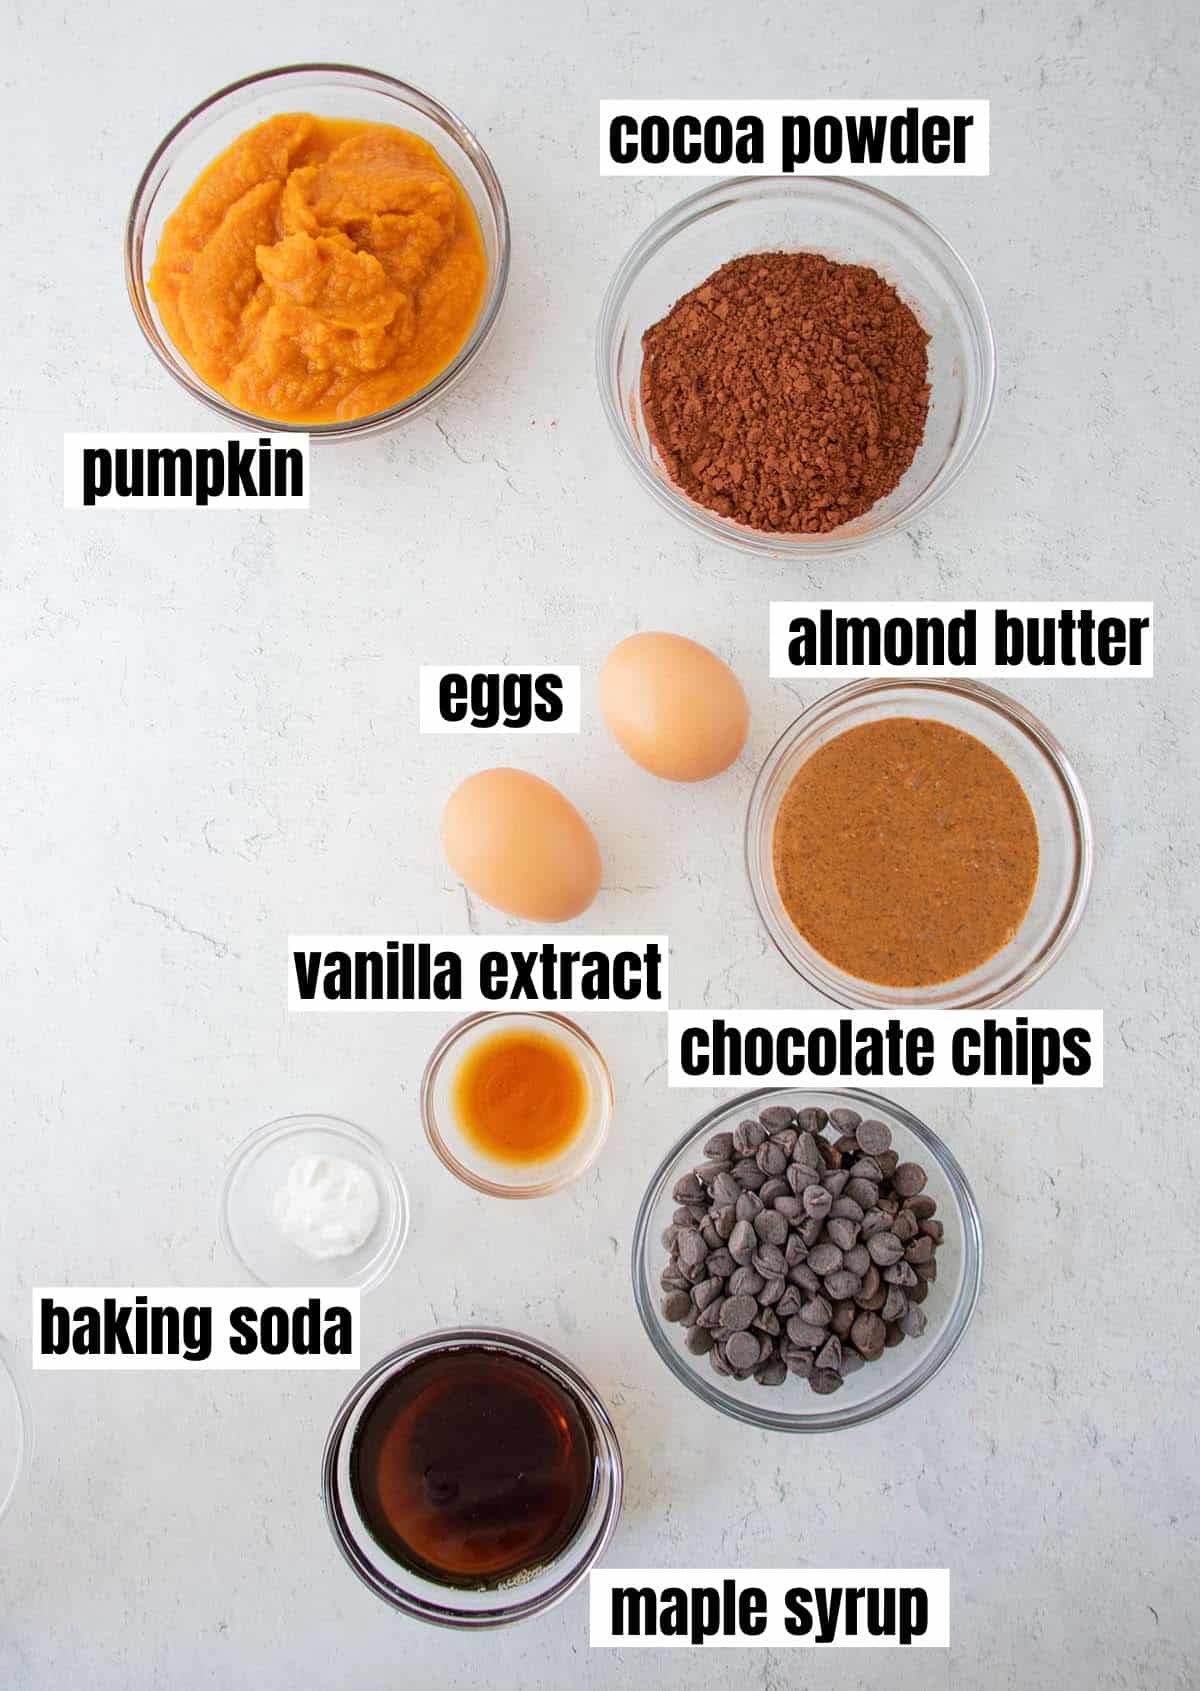 ingredients for pumpkin brownies which include pumpkin, cocoa powder, eggs, almond butter, vanilla extract, chocolate chips, baking soda and maple syrup.